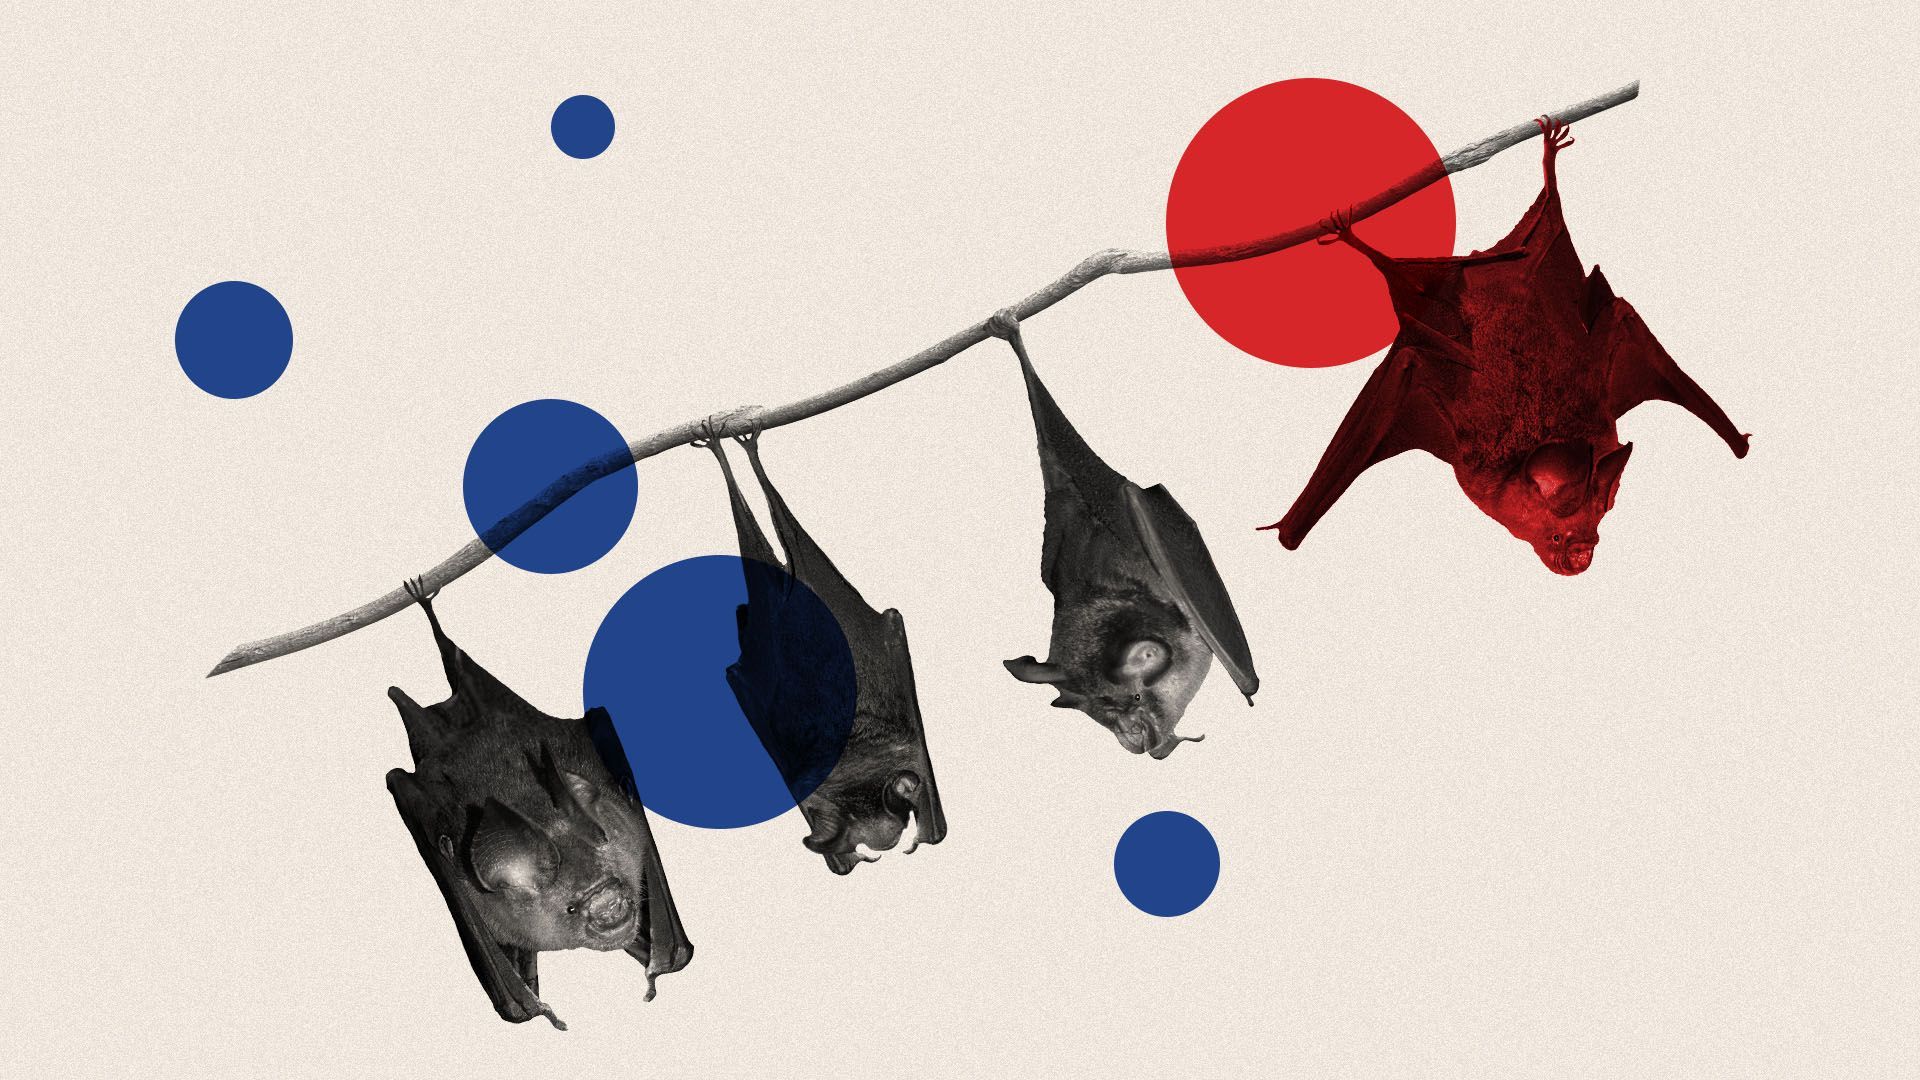 Illustrated collage of bats hanging from a stick surrounded by circles